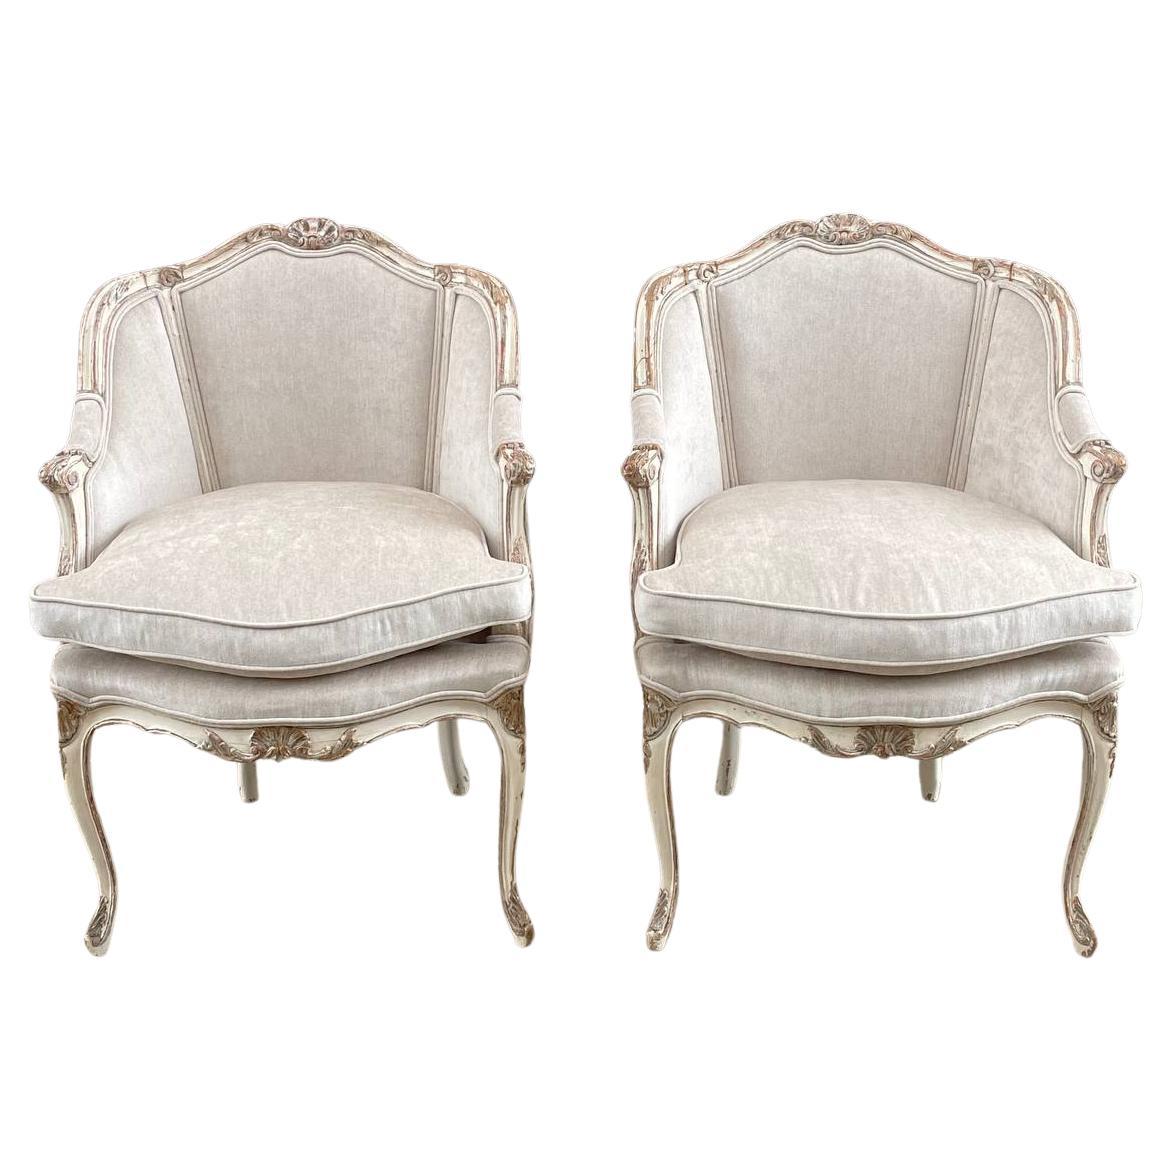 Pair of French Louis XV style Painted and Parcel-Gilt Armchairs